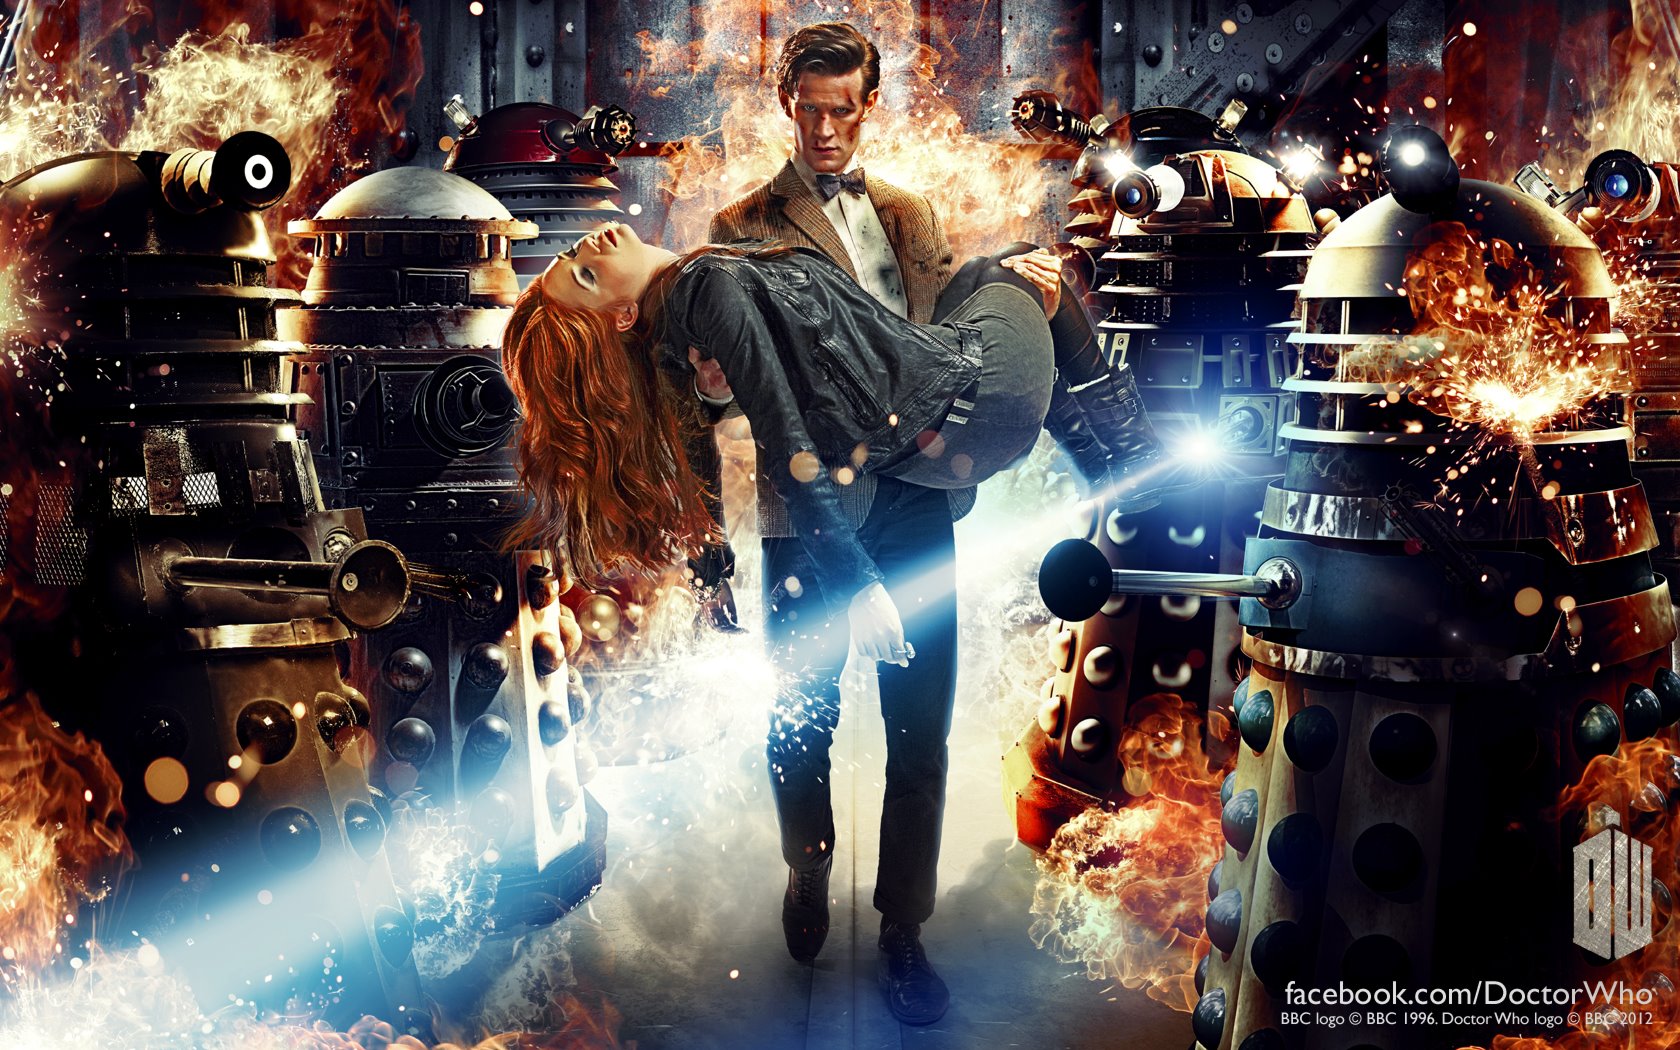 explosion, dalek, fire, tv show, robot, doctor who